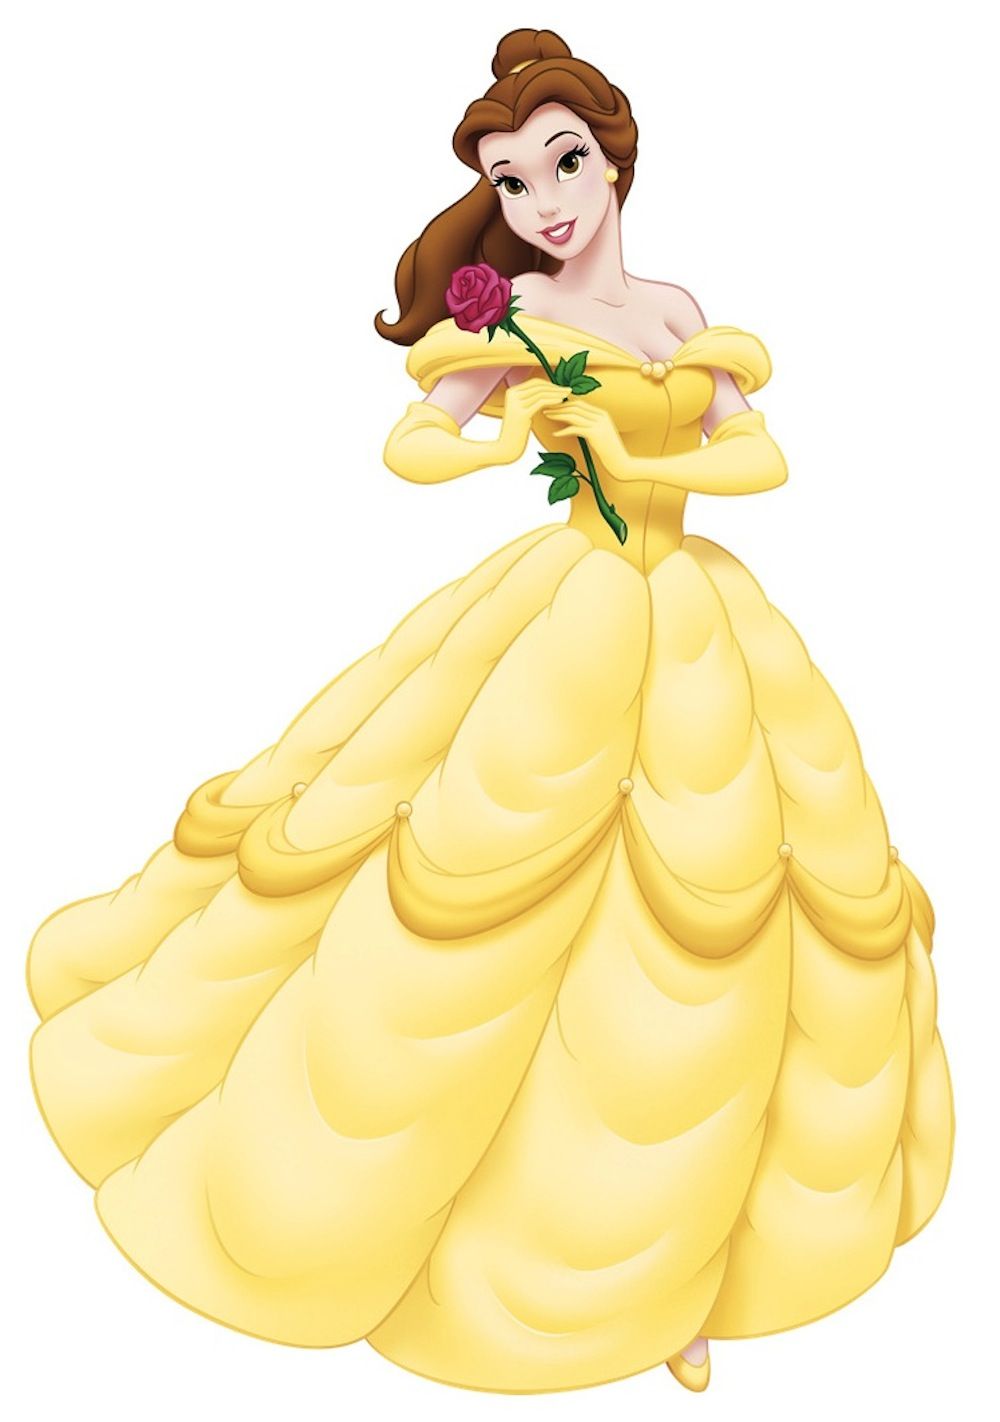 belle yellow gown